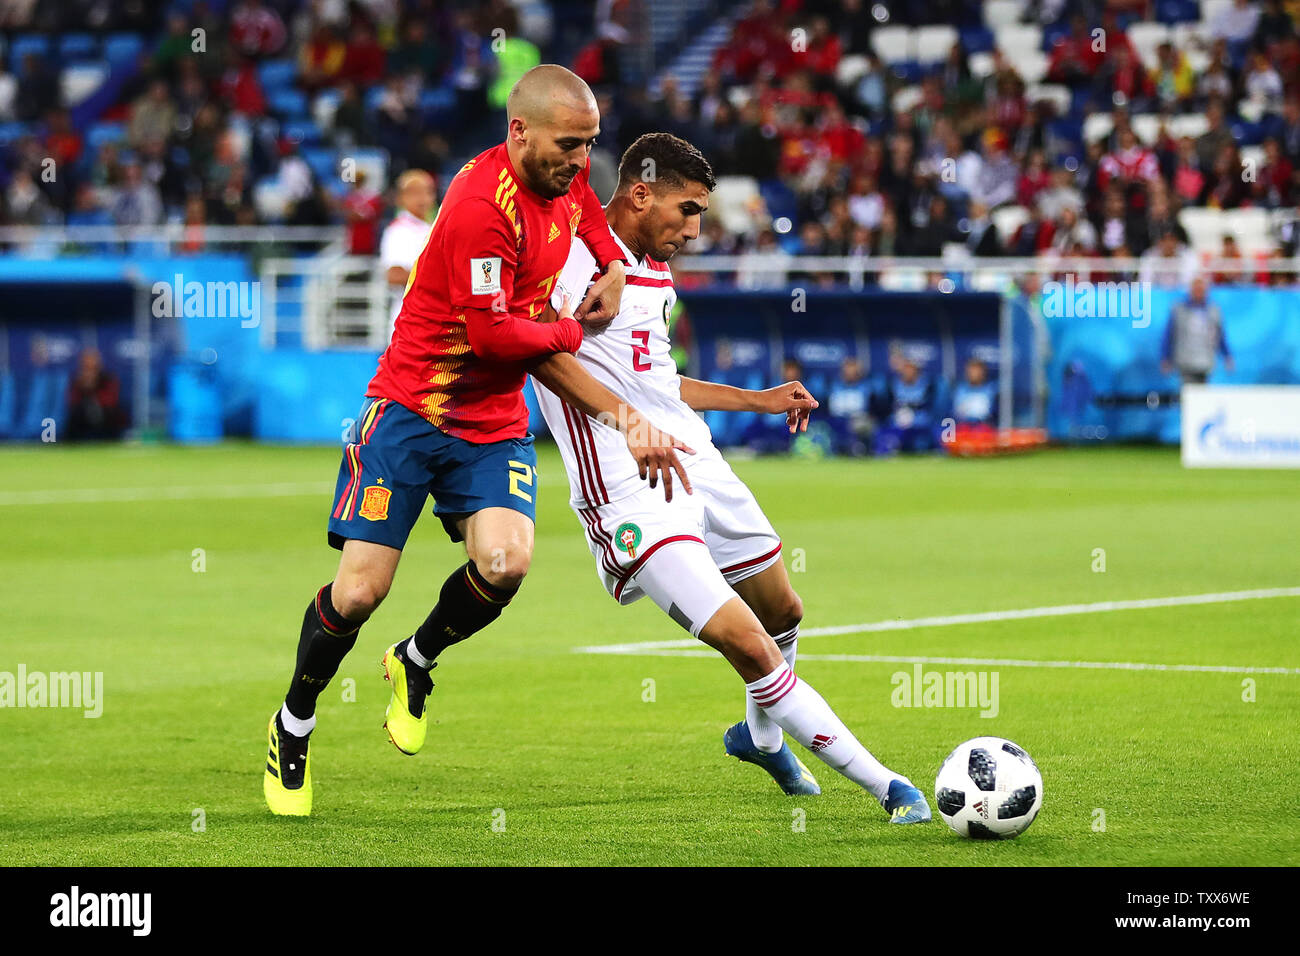 David Silva (L) of Spain competes with Achraf Hakimi of Morocco during the 2018 FIFA World Cup Group B match at Kaliningrad Stadium in Kaliningrad, Russia on June 25, 2018. The game finished in a 2-2 draw. Photo by Chris Brunskill/UPI Stock Photo